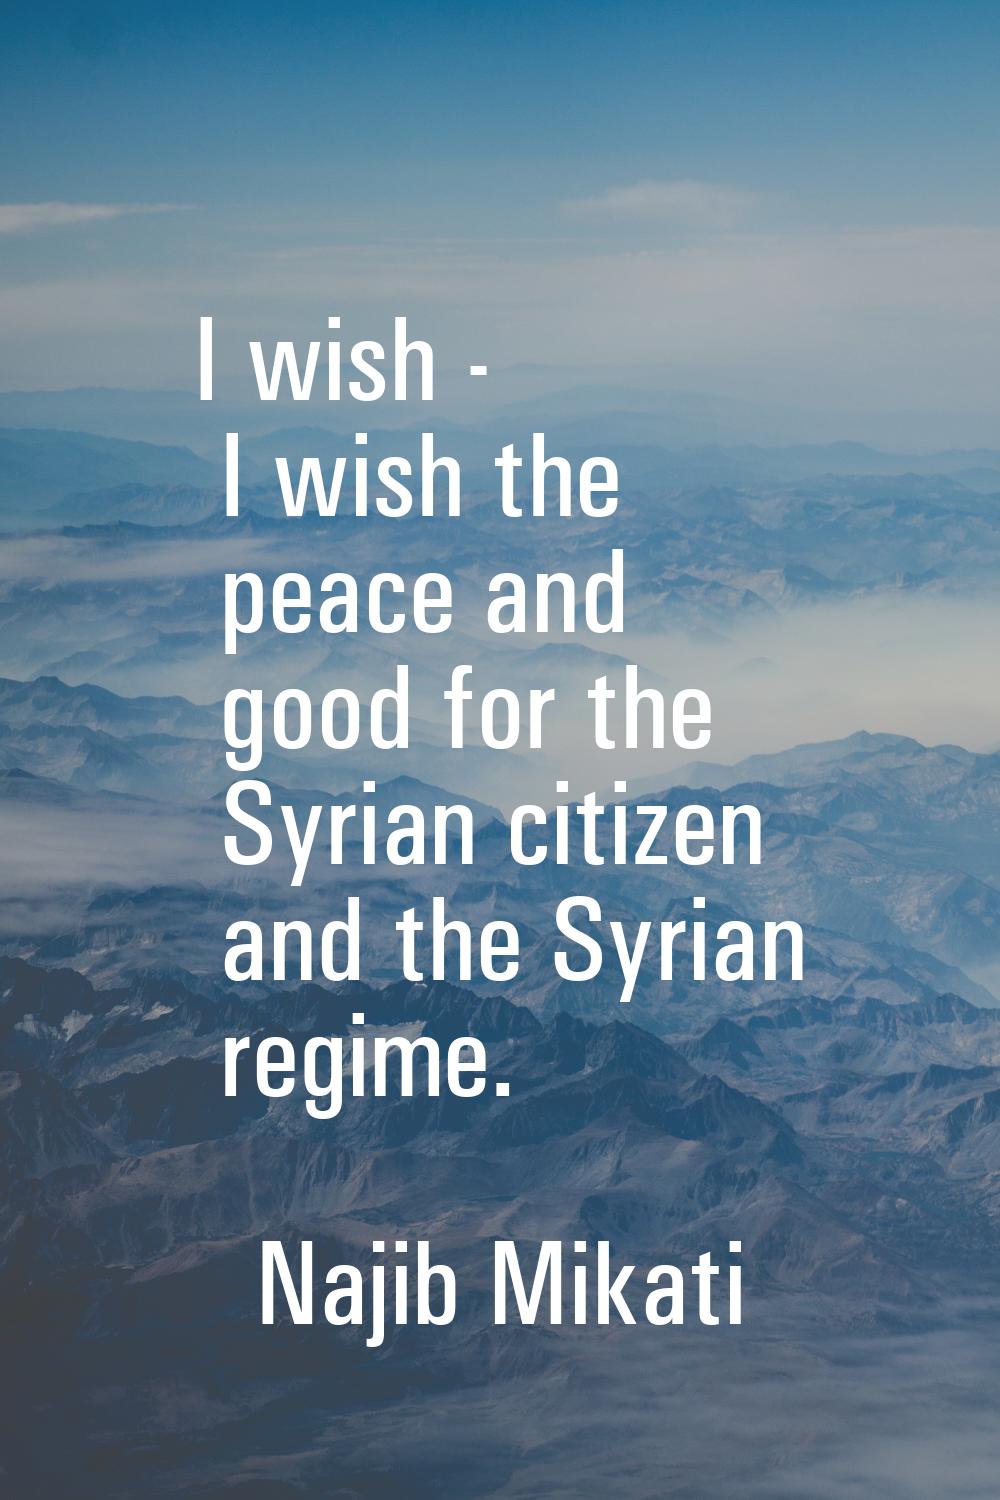 I wish - I wish the peace and good for the Syrian citizen and the Syrian regime.